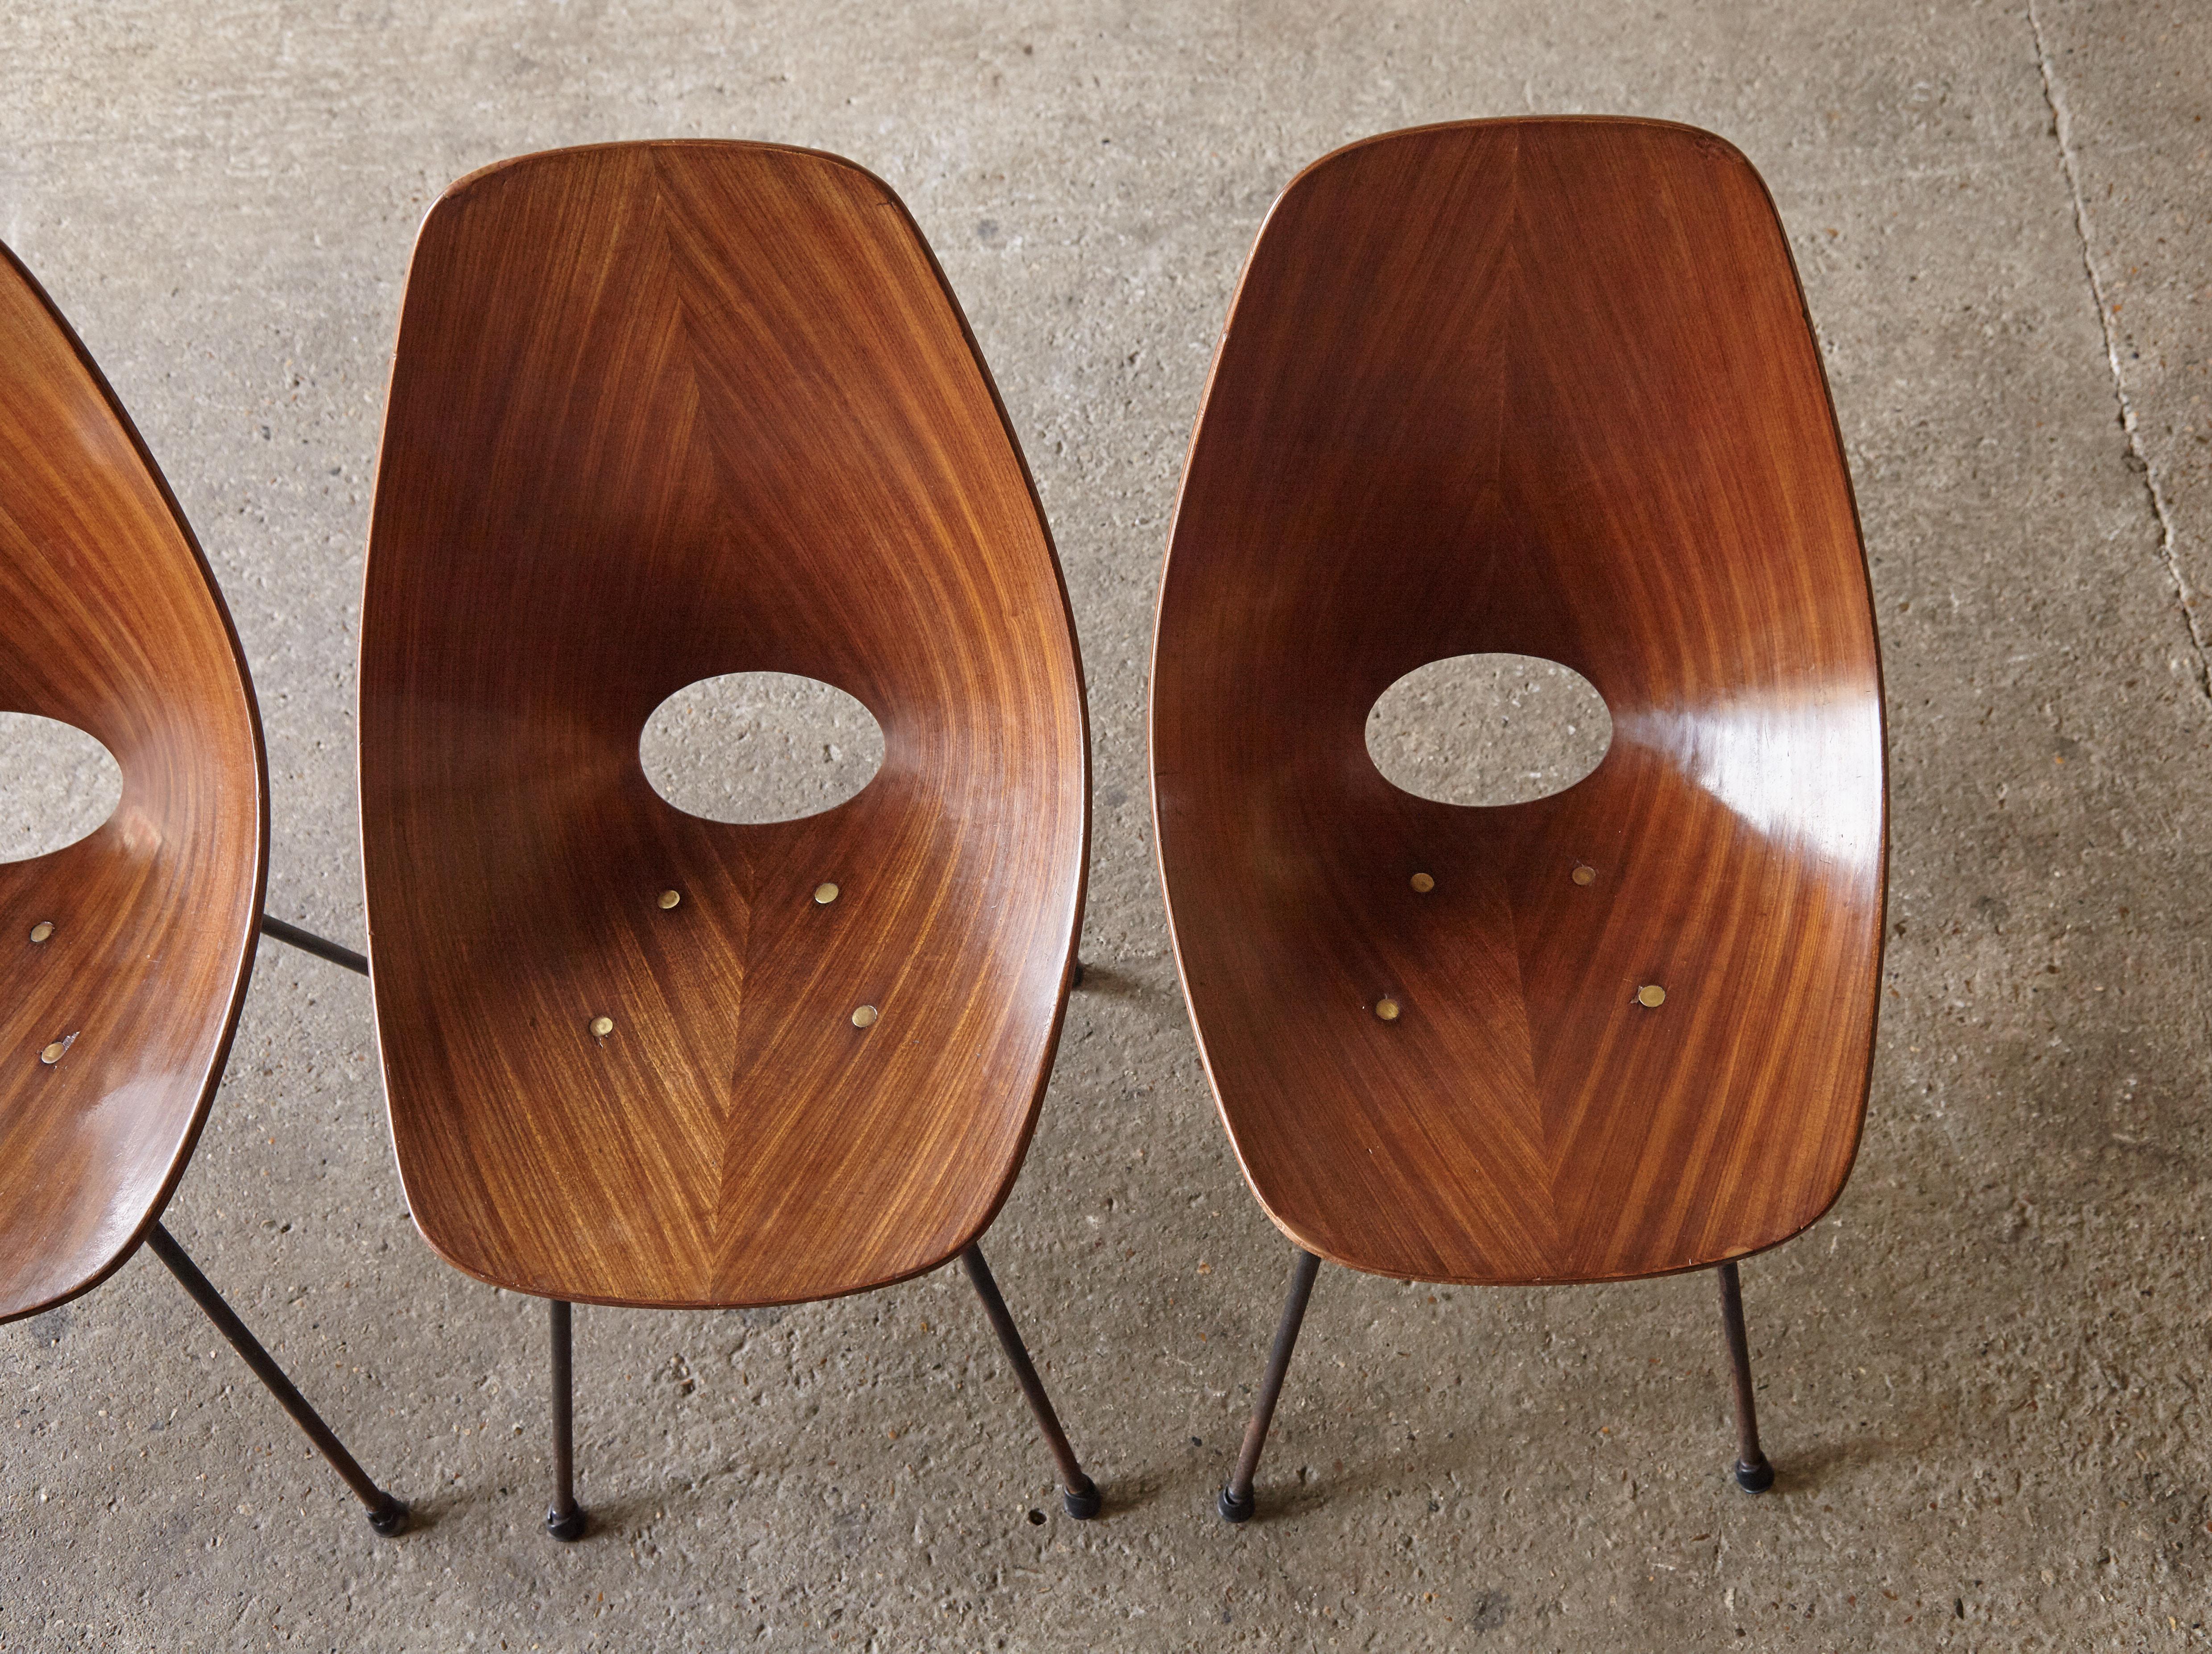 20th Century Set of Four Medea Chairs by Vittorio Nobili, Fratelli Tagliabue, Italy, 1950s